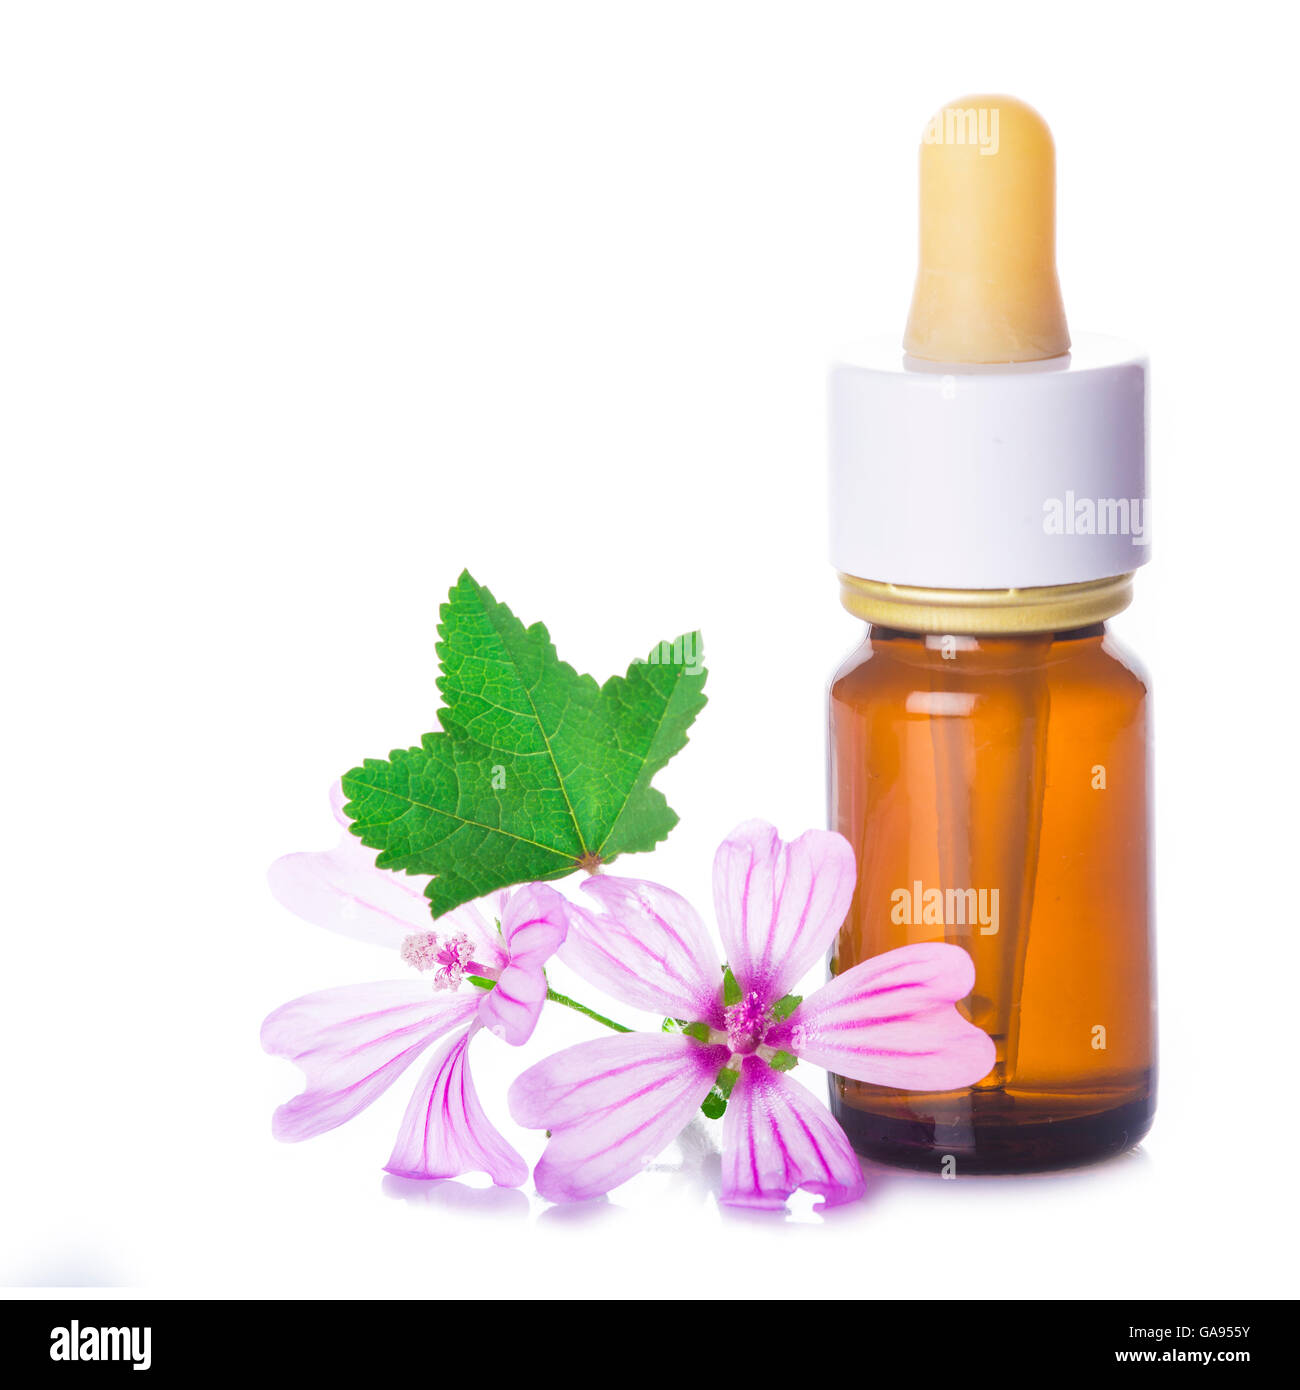 Dropper bottle with mallow malva extract or essential oil isolated on a white background Stock Photo